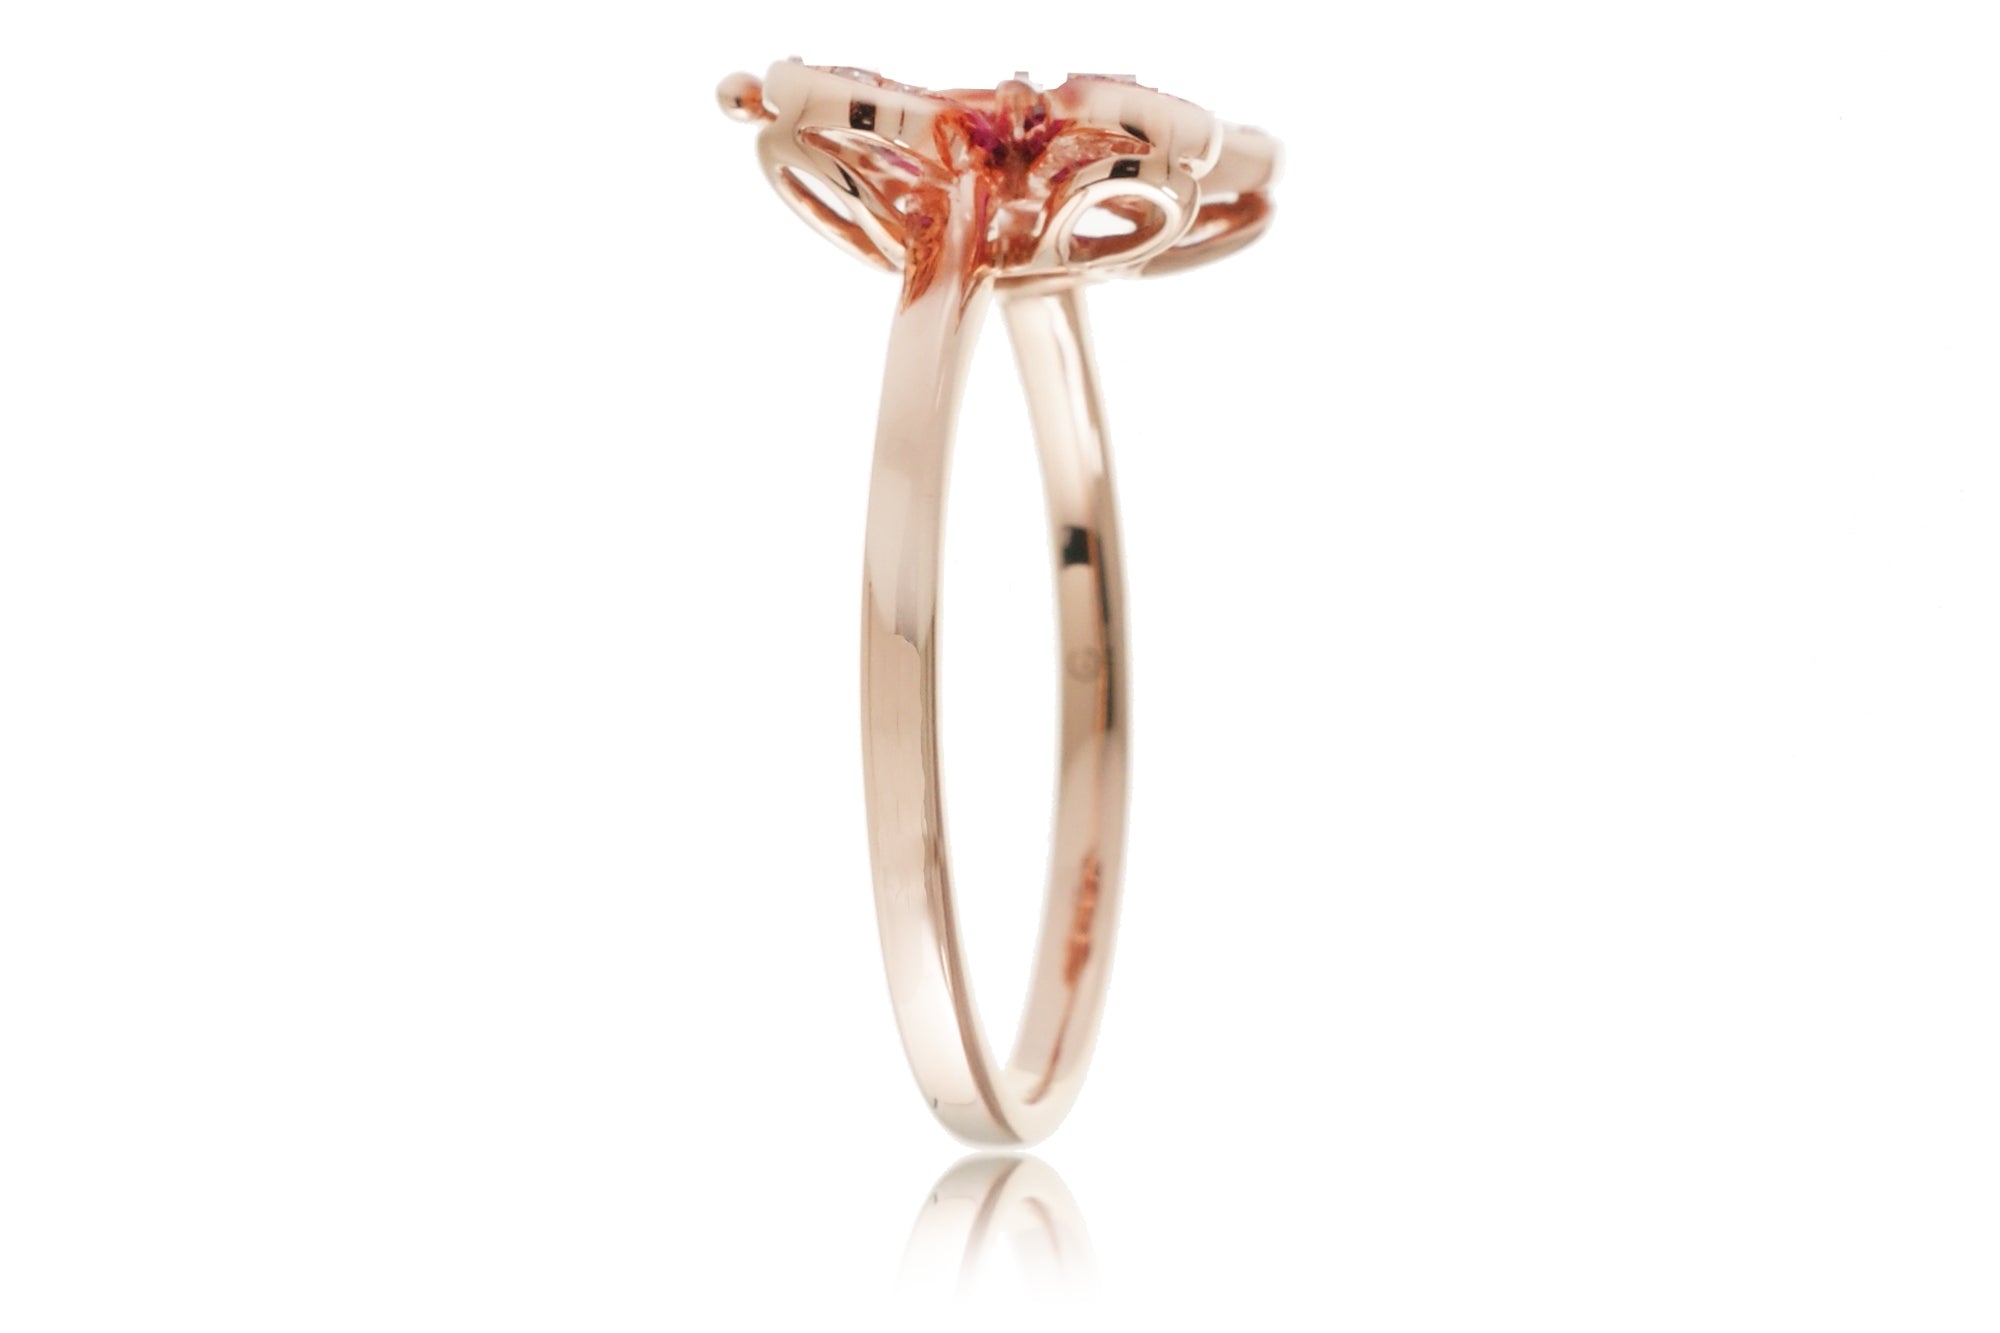 The Agrias Ruby Butterfly Ring